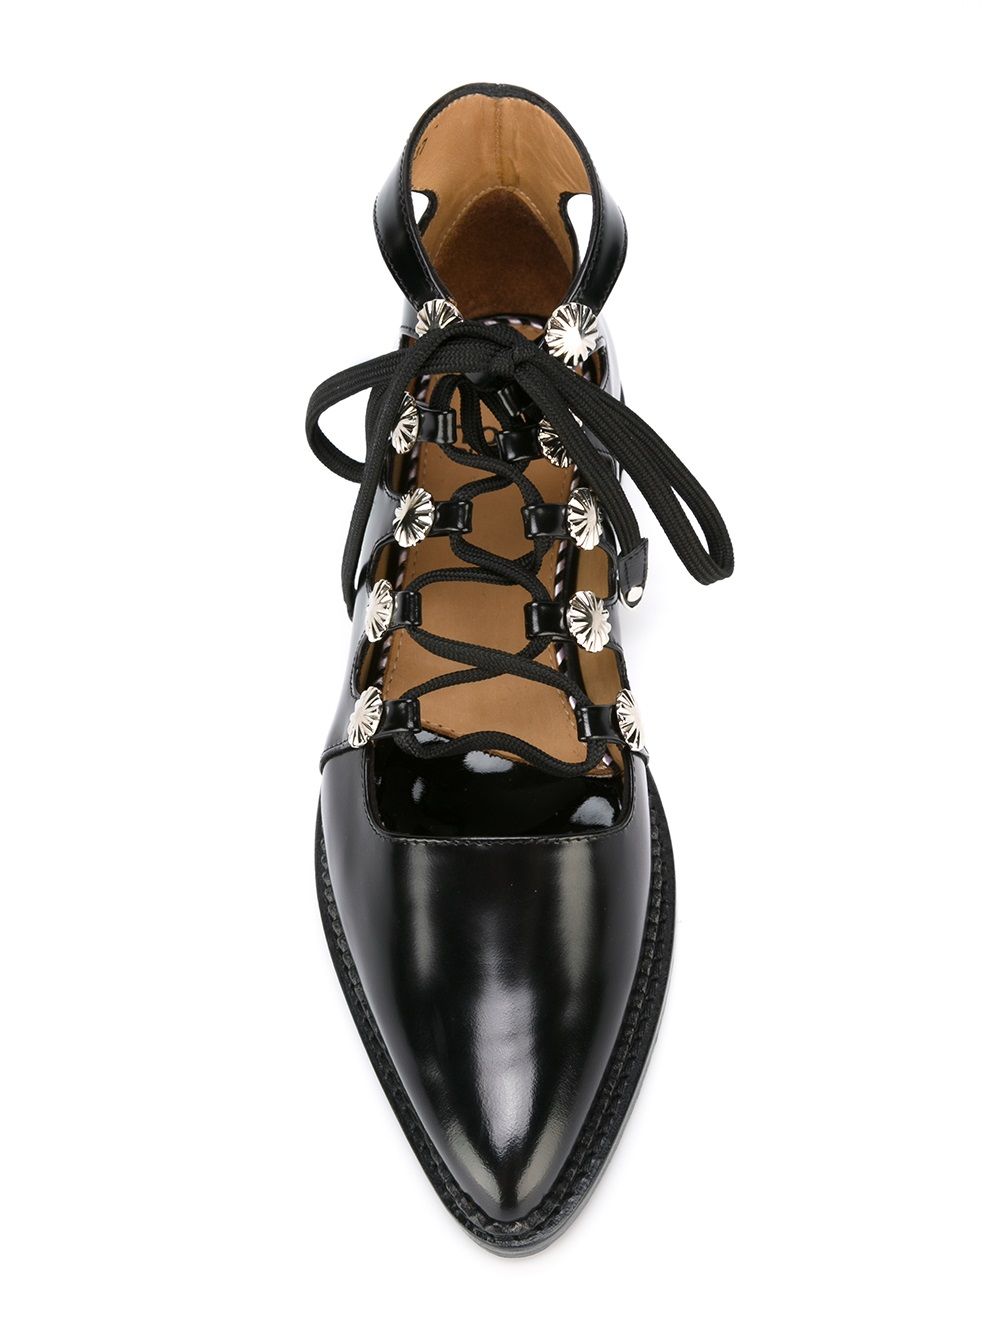 Toga Pulla cut-out lace-up Ankle Boots - Farfetch